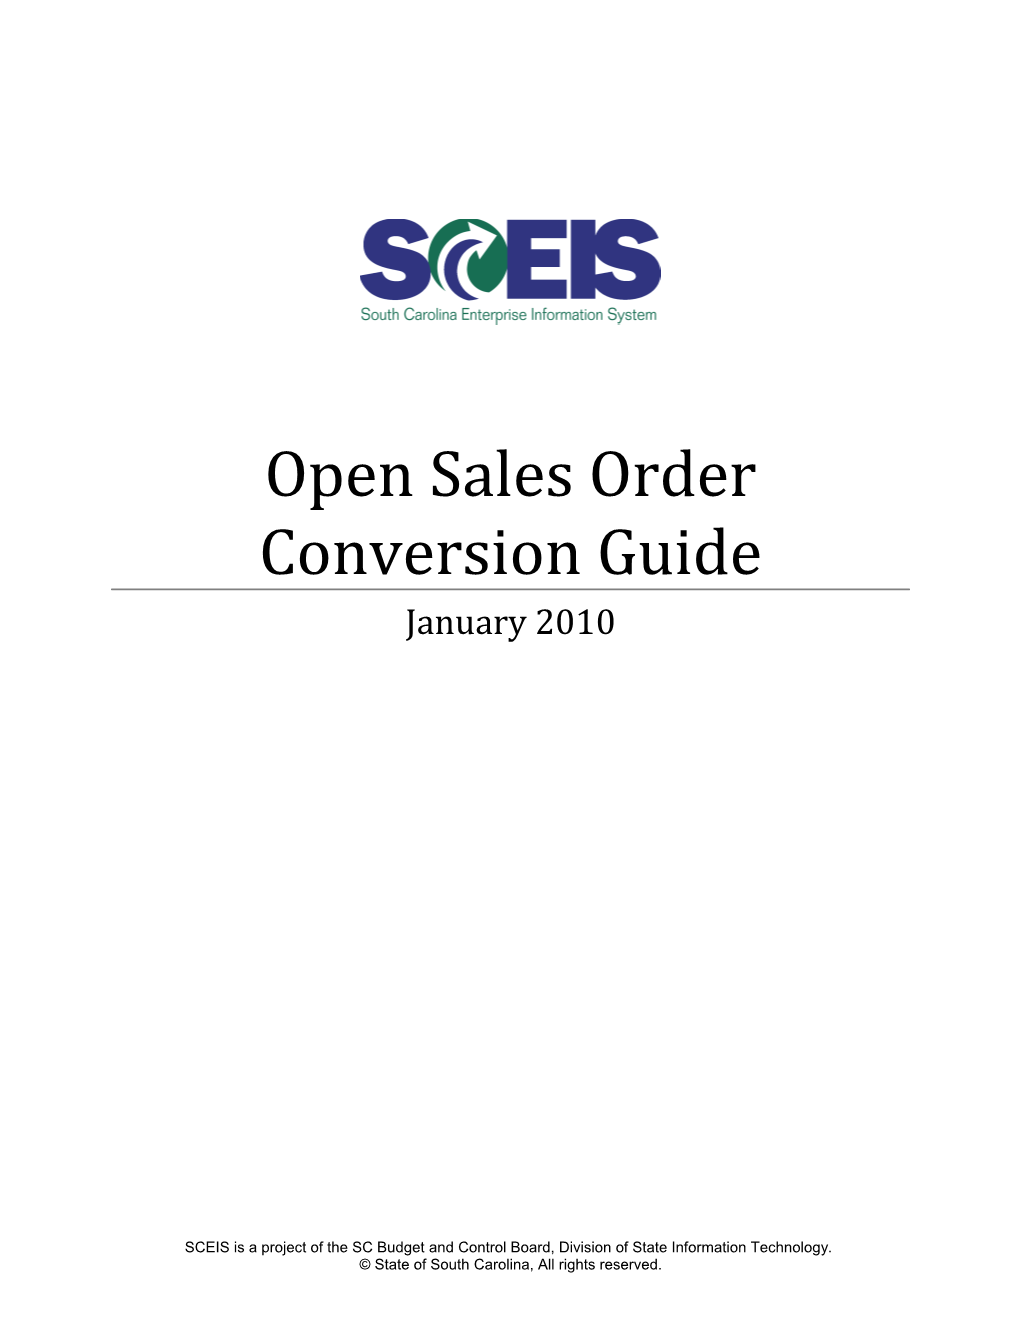 Open Sales Order Conversion Guide